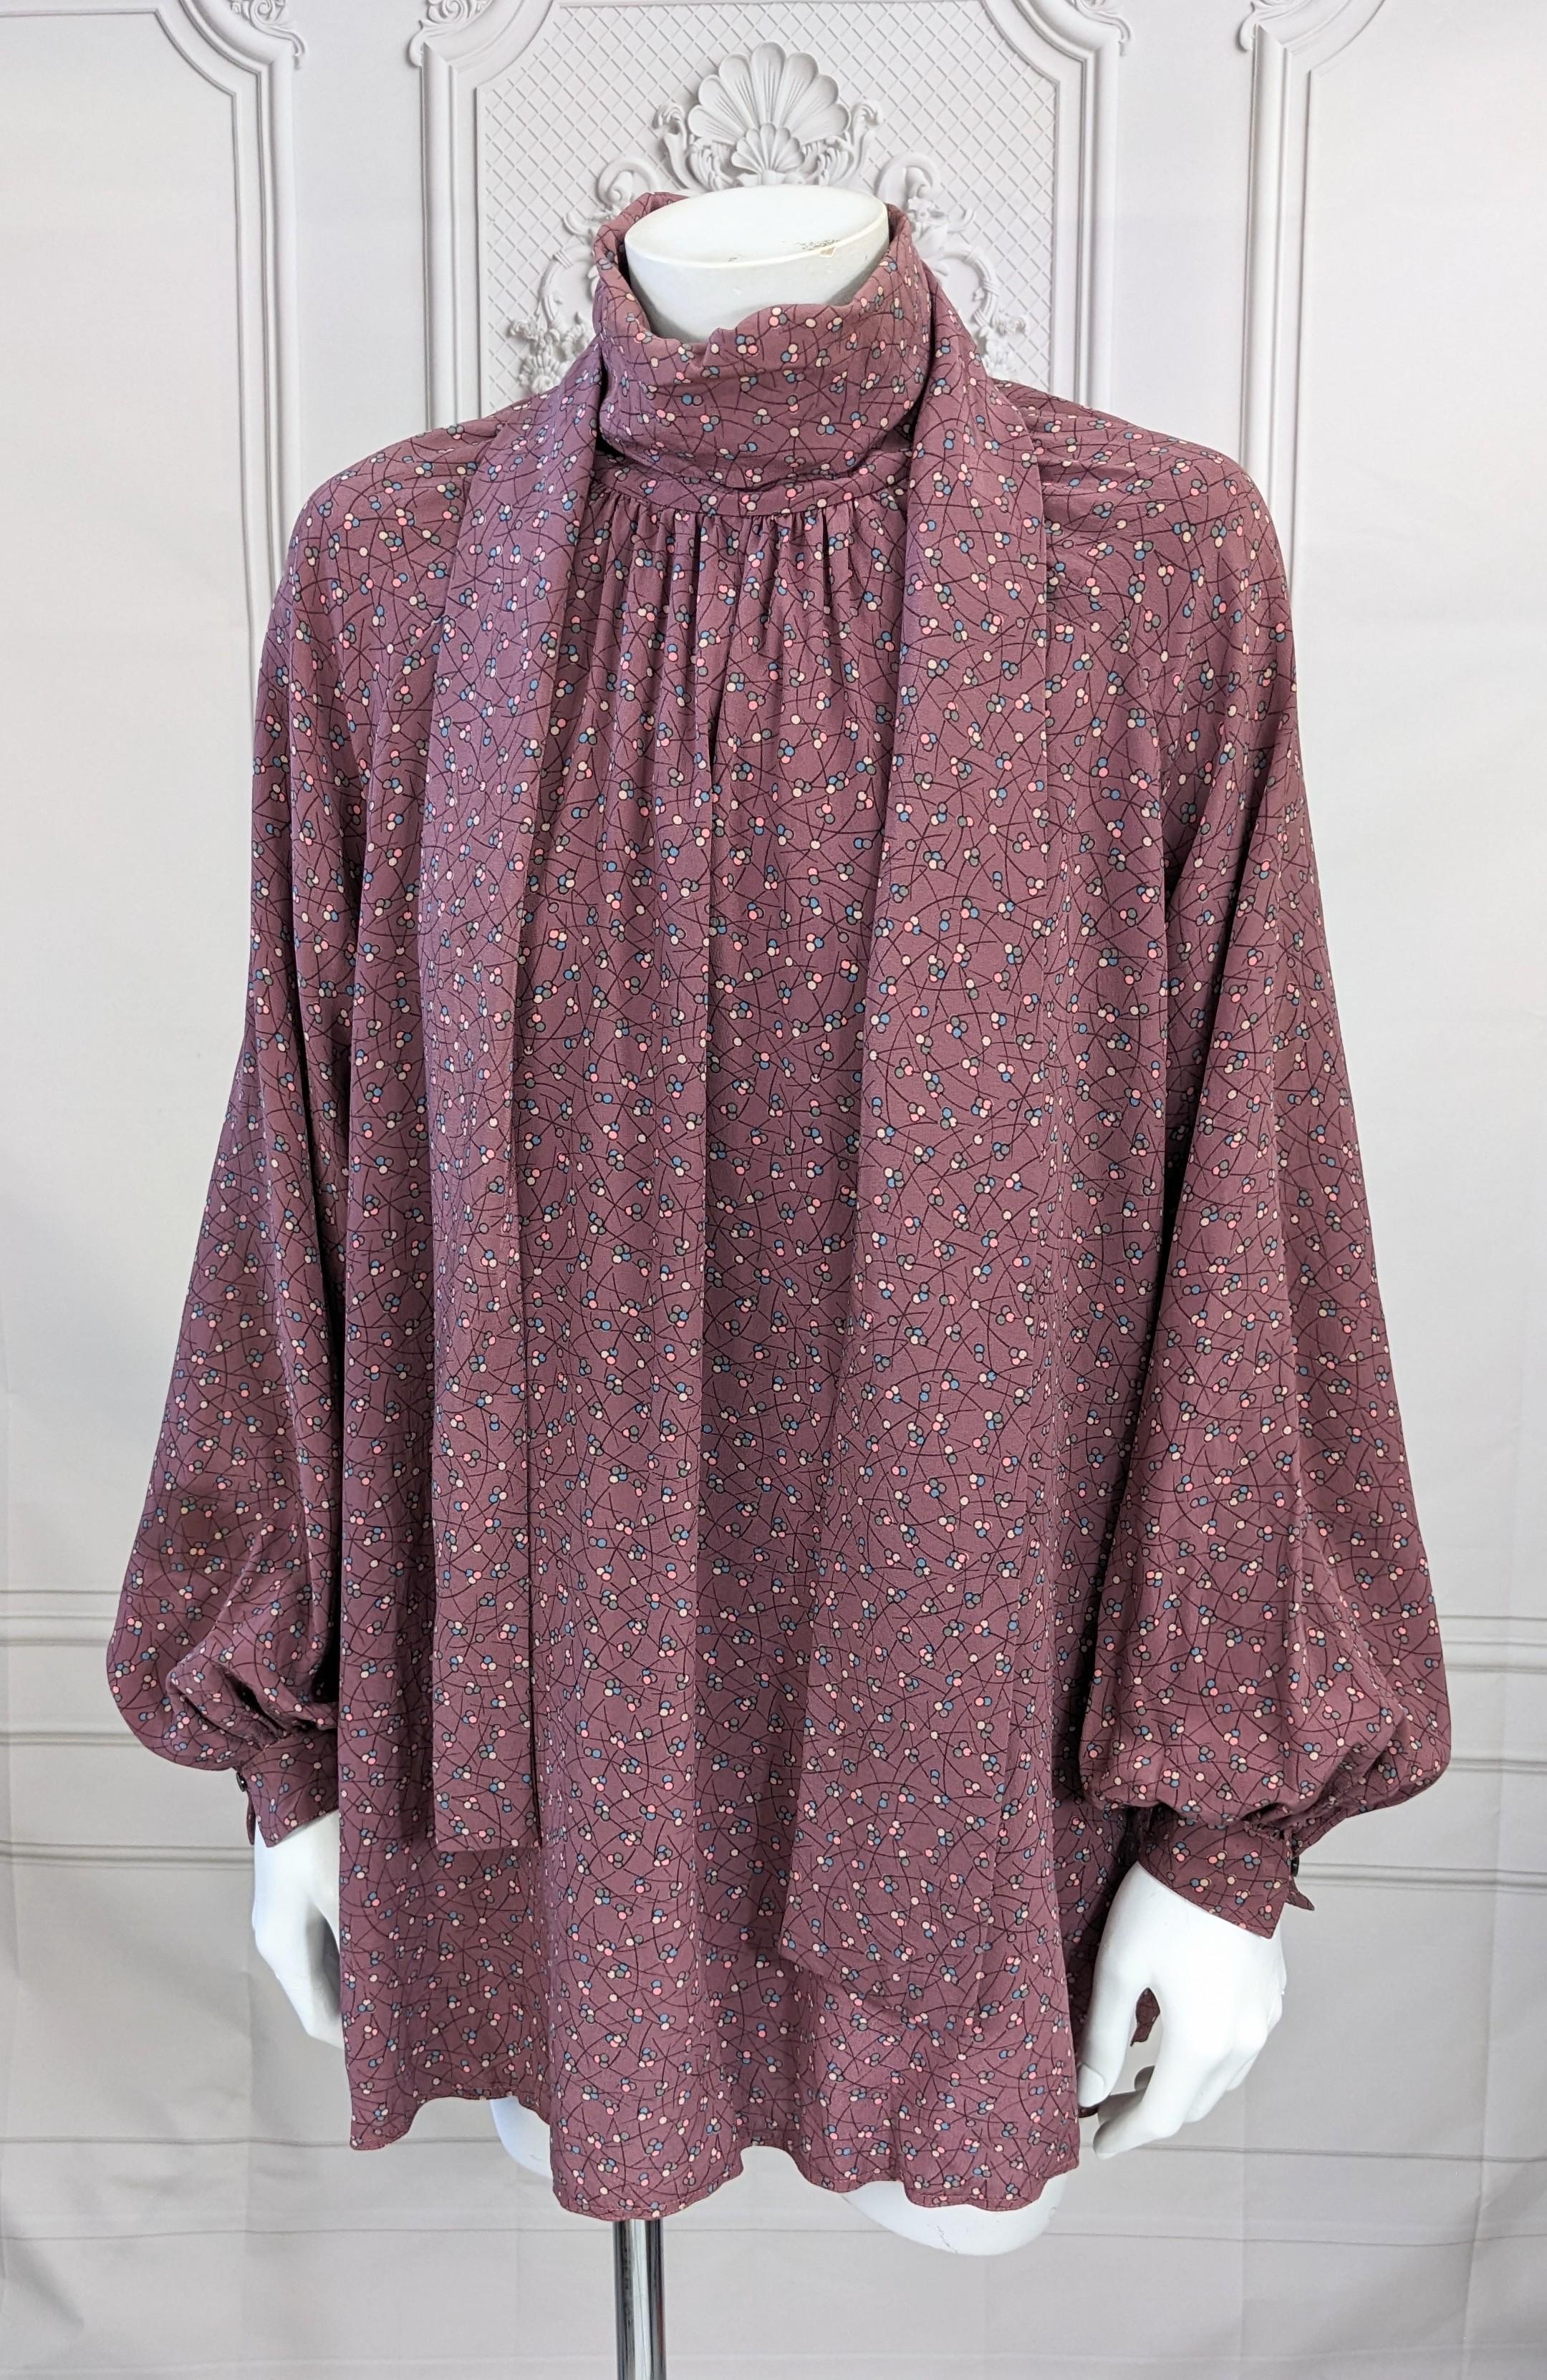 Chloe by Karl Lagerfeld Bow Tied Poets Blouse In Good Condition For Sale In New York, NY